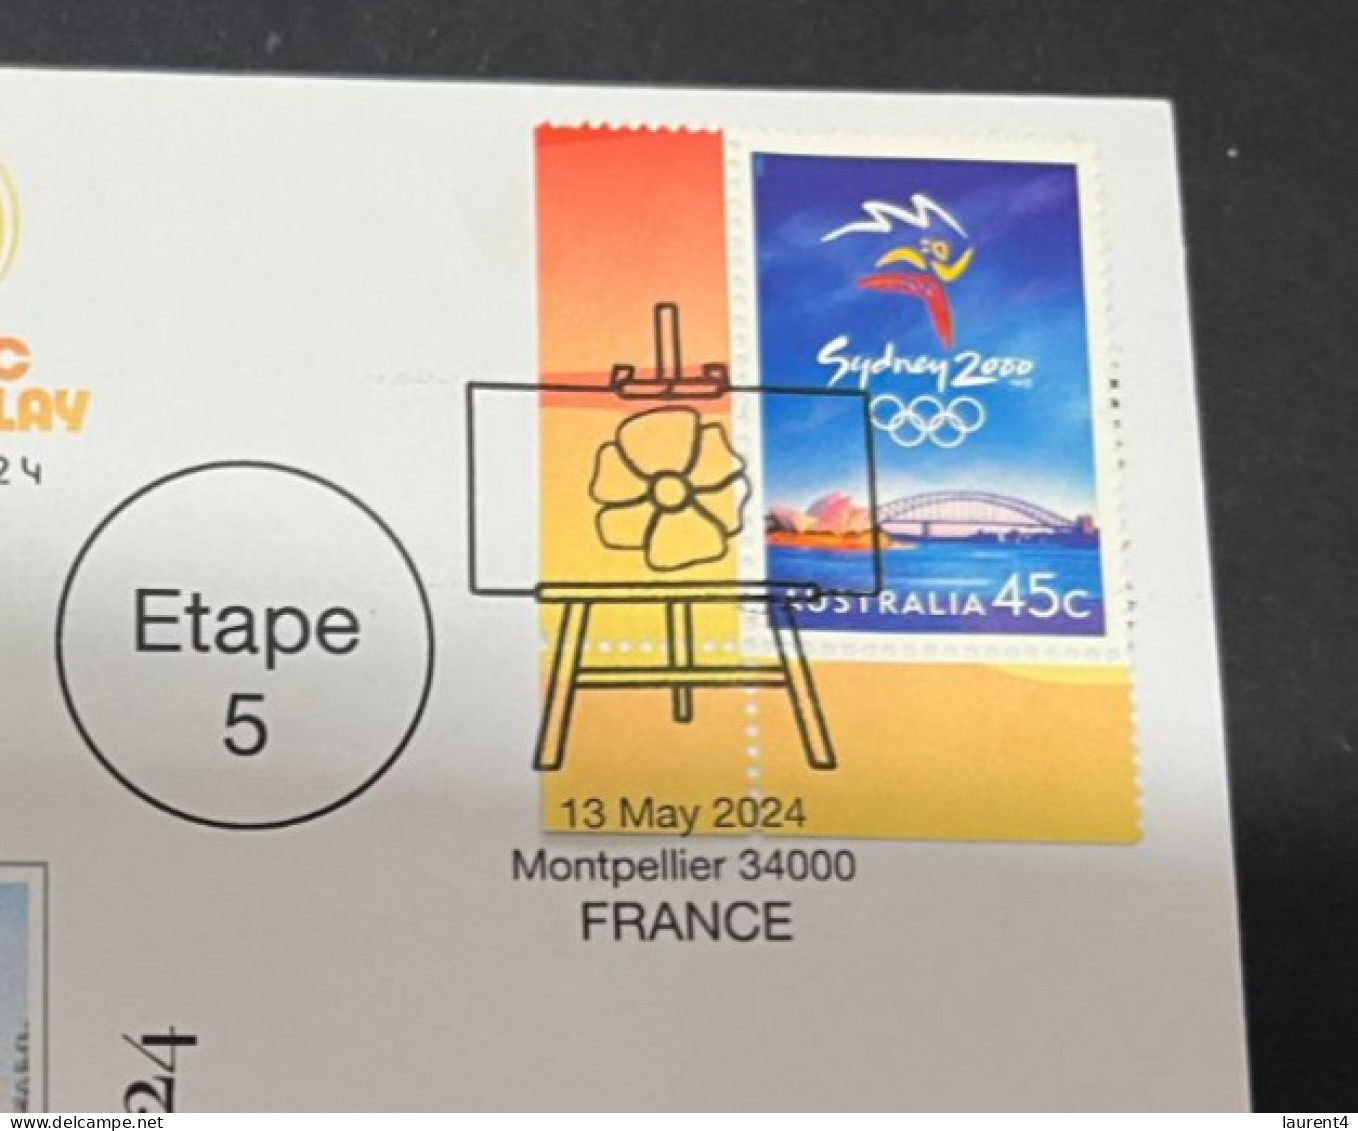 14-5-2024 (5 Z 7) Paris Olympic Games 2024 - Torch Relay (Etape 5) In Montpellier (13-5-2024) With OLYMPIC Stamp - Summer 2024: Paris